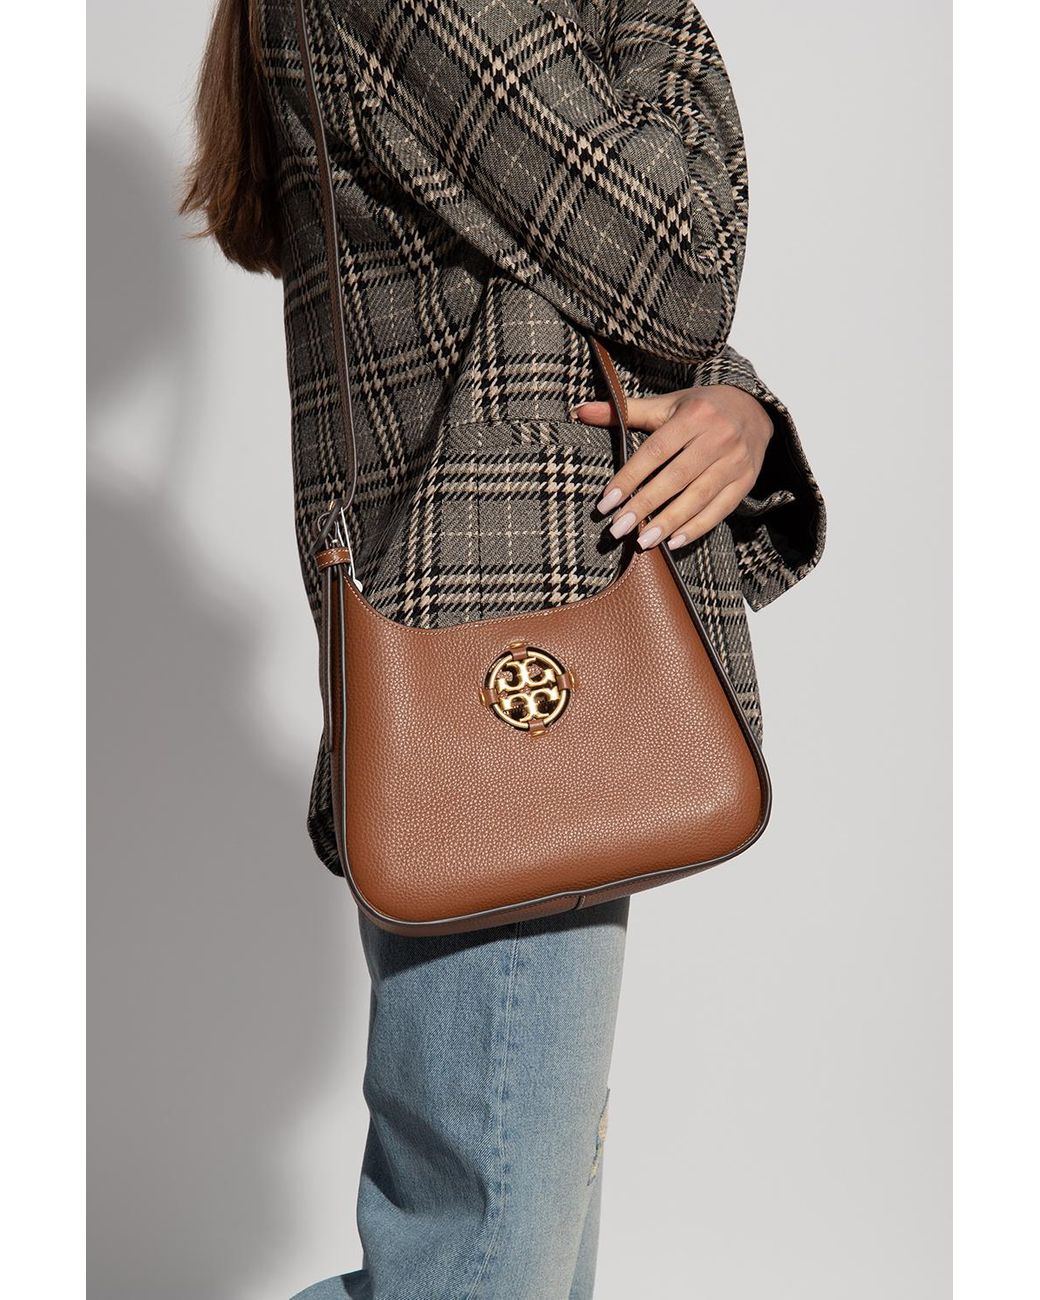 Tory Burch Miller Small Classic Shoulder Bag in Brown